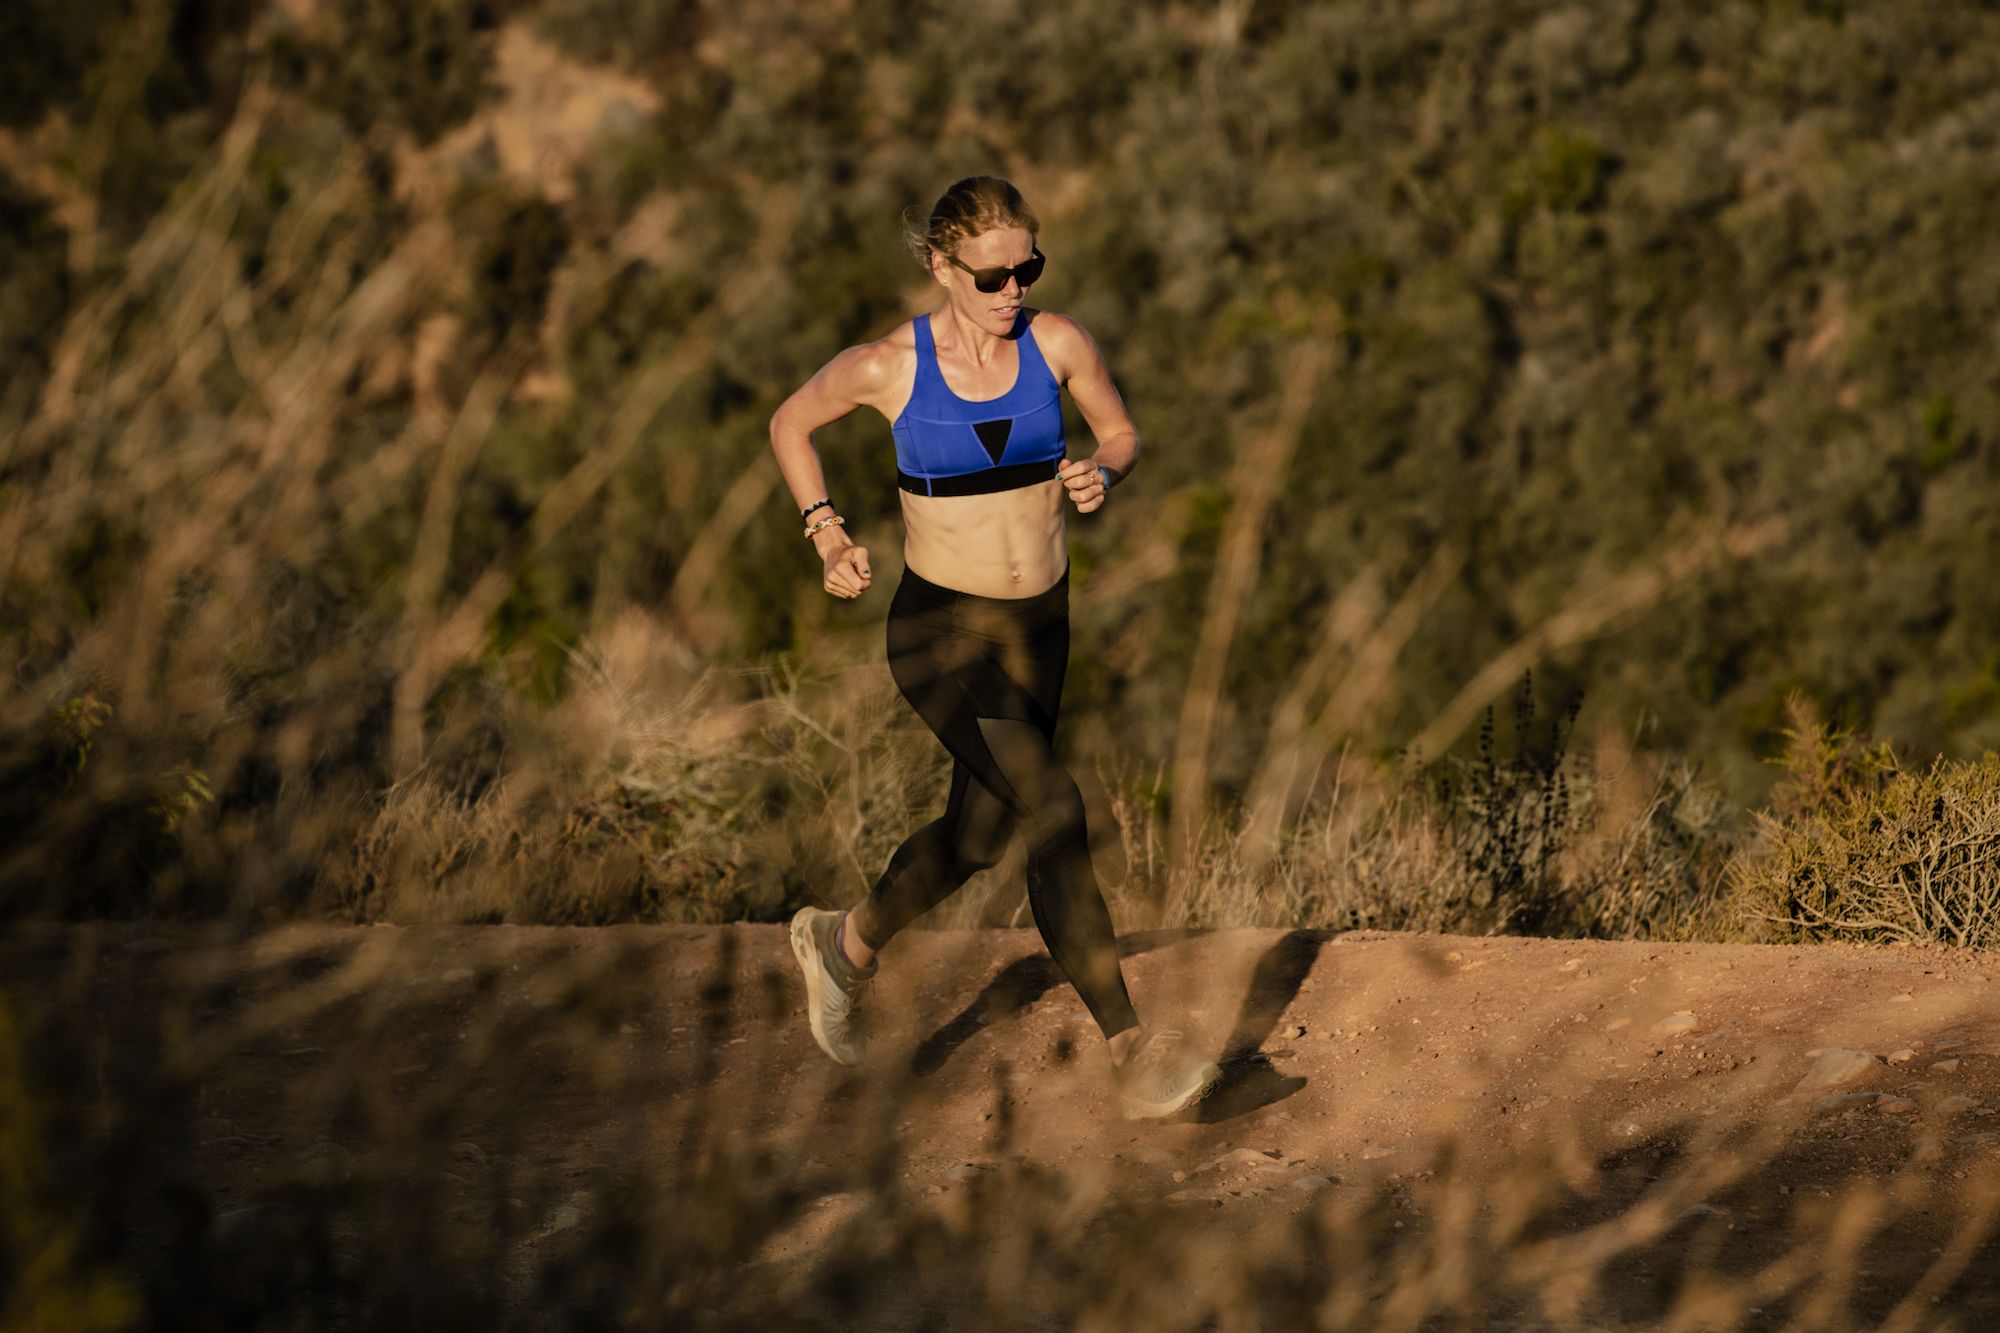 Women And Ultrarunning: Why Women Make Awesome Ultra Runners